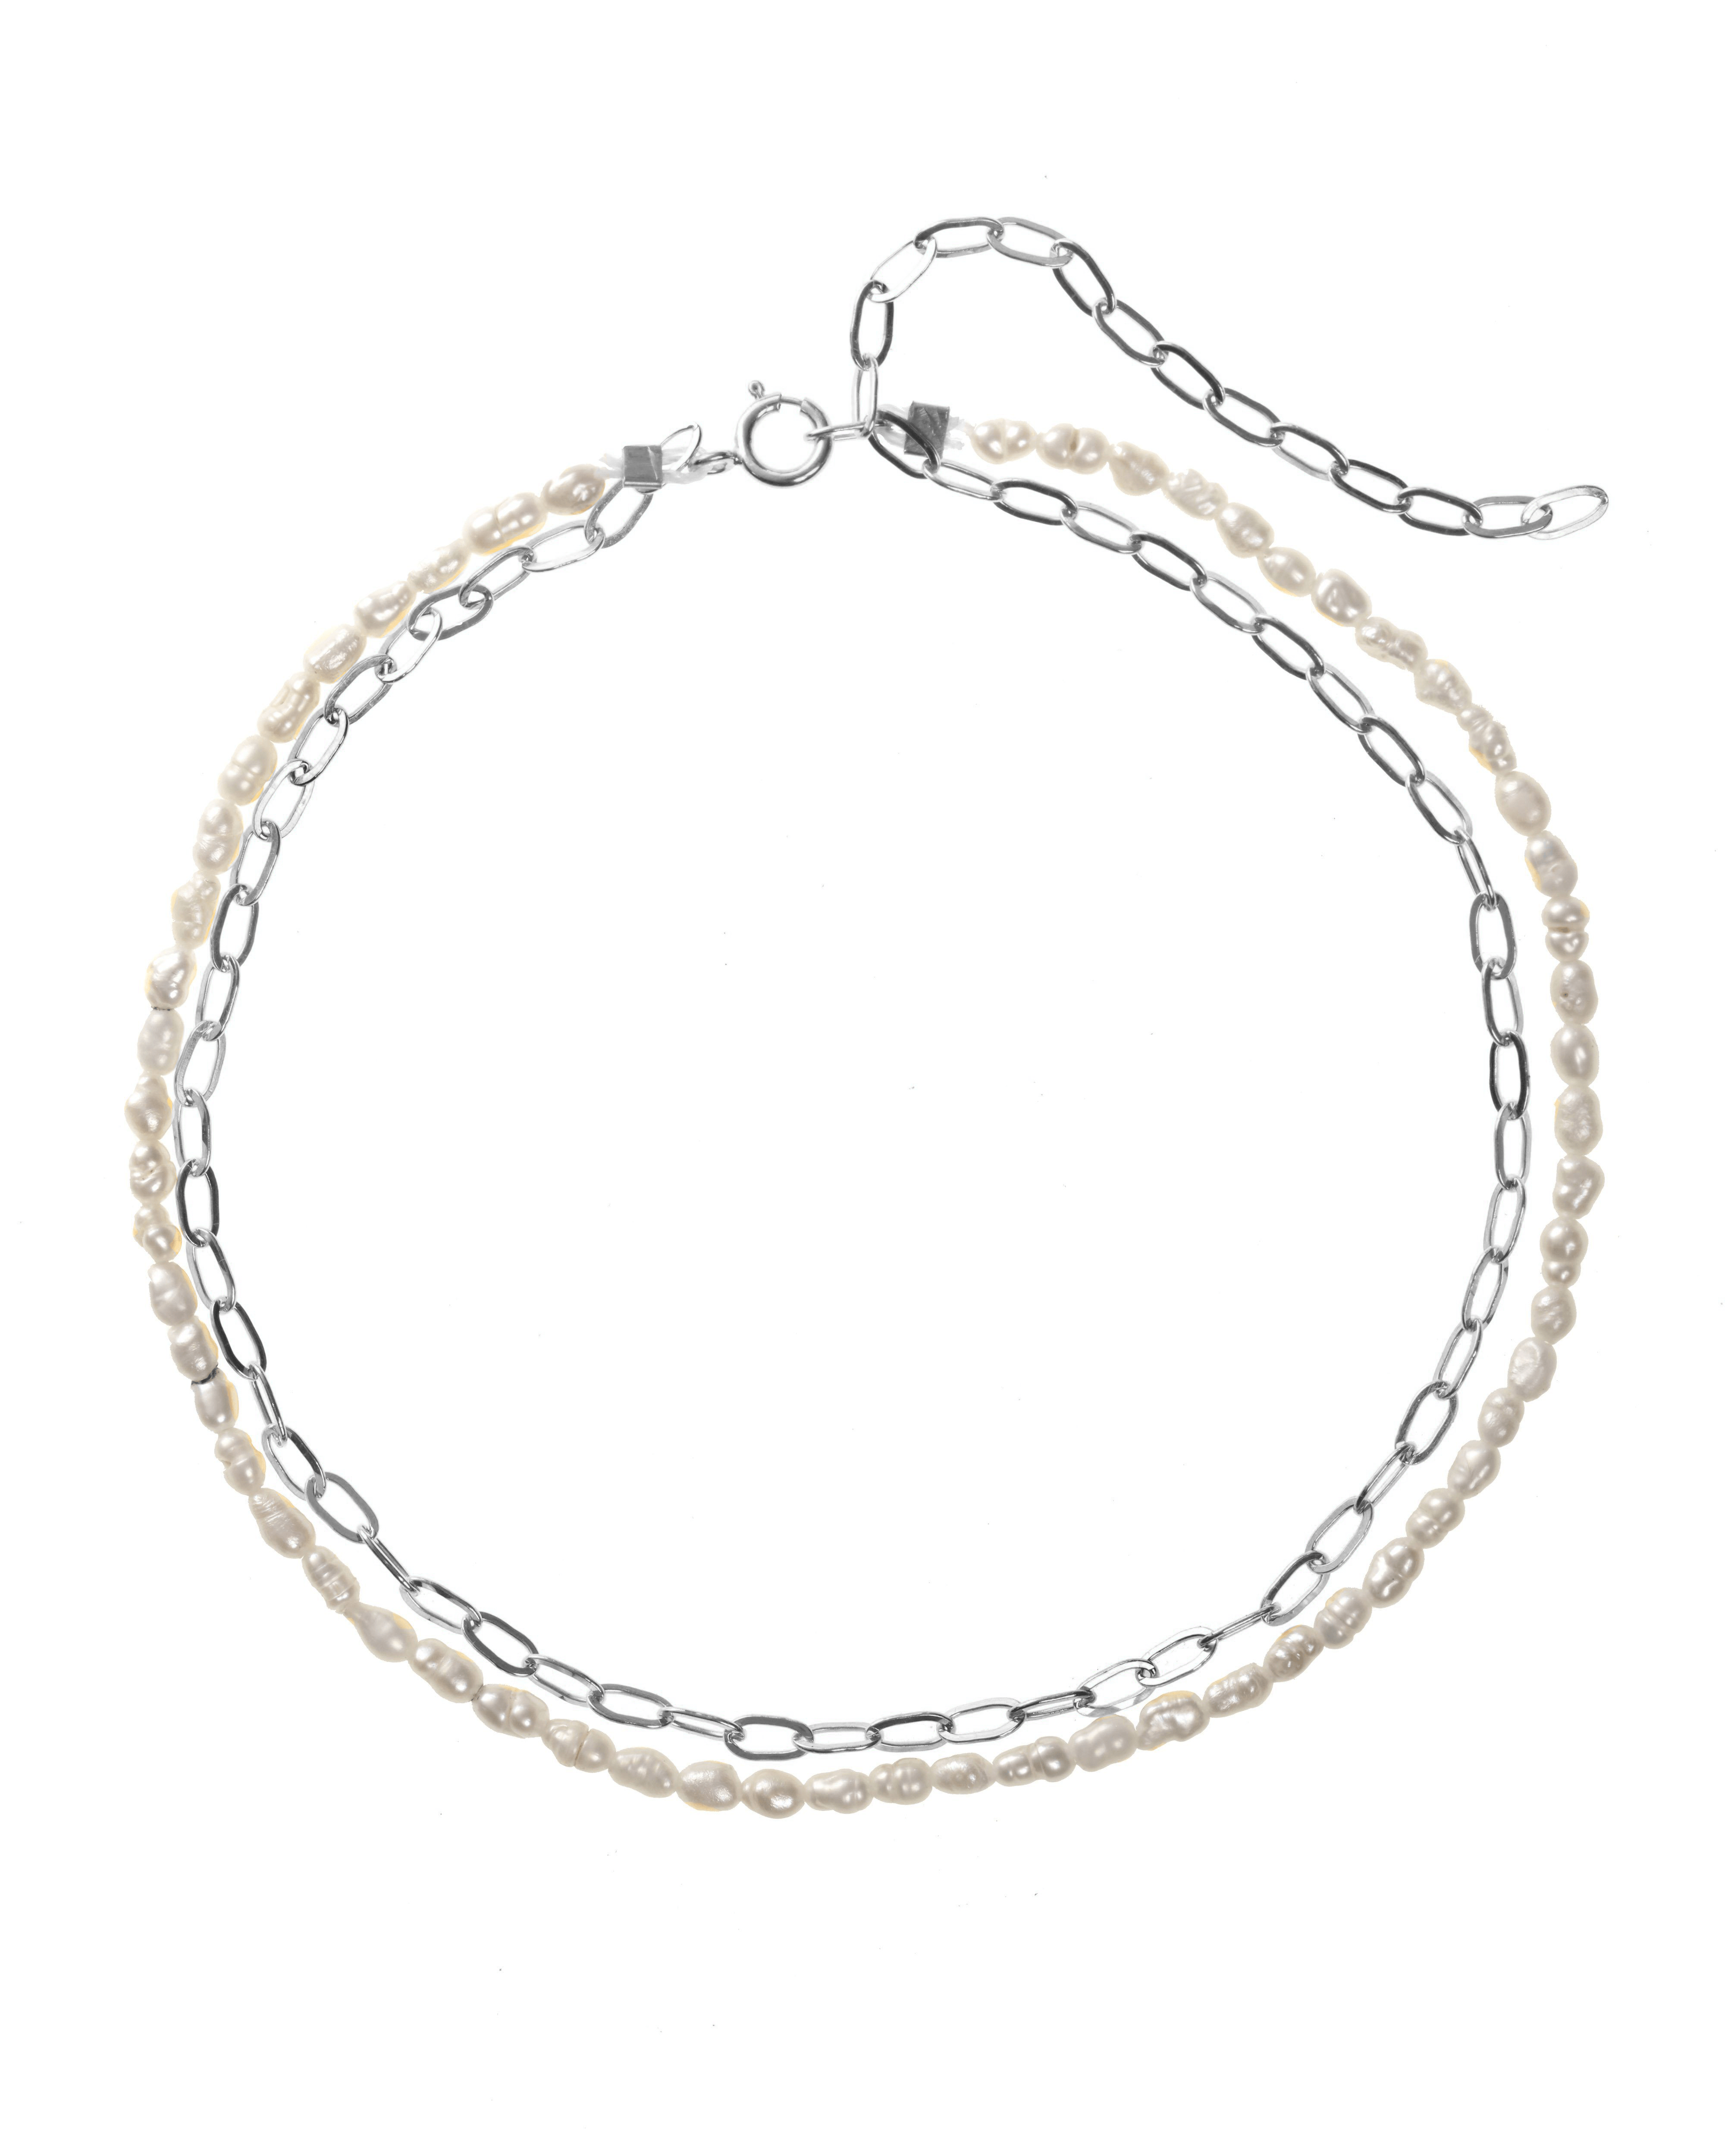 Lamera Anklet by KOZAKH. A 9 to 11 inch adjustable length double anklet. One strand is Sterling Silver flat link chain and the other is a strand of 4mm white Rice Pearls.